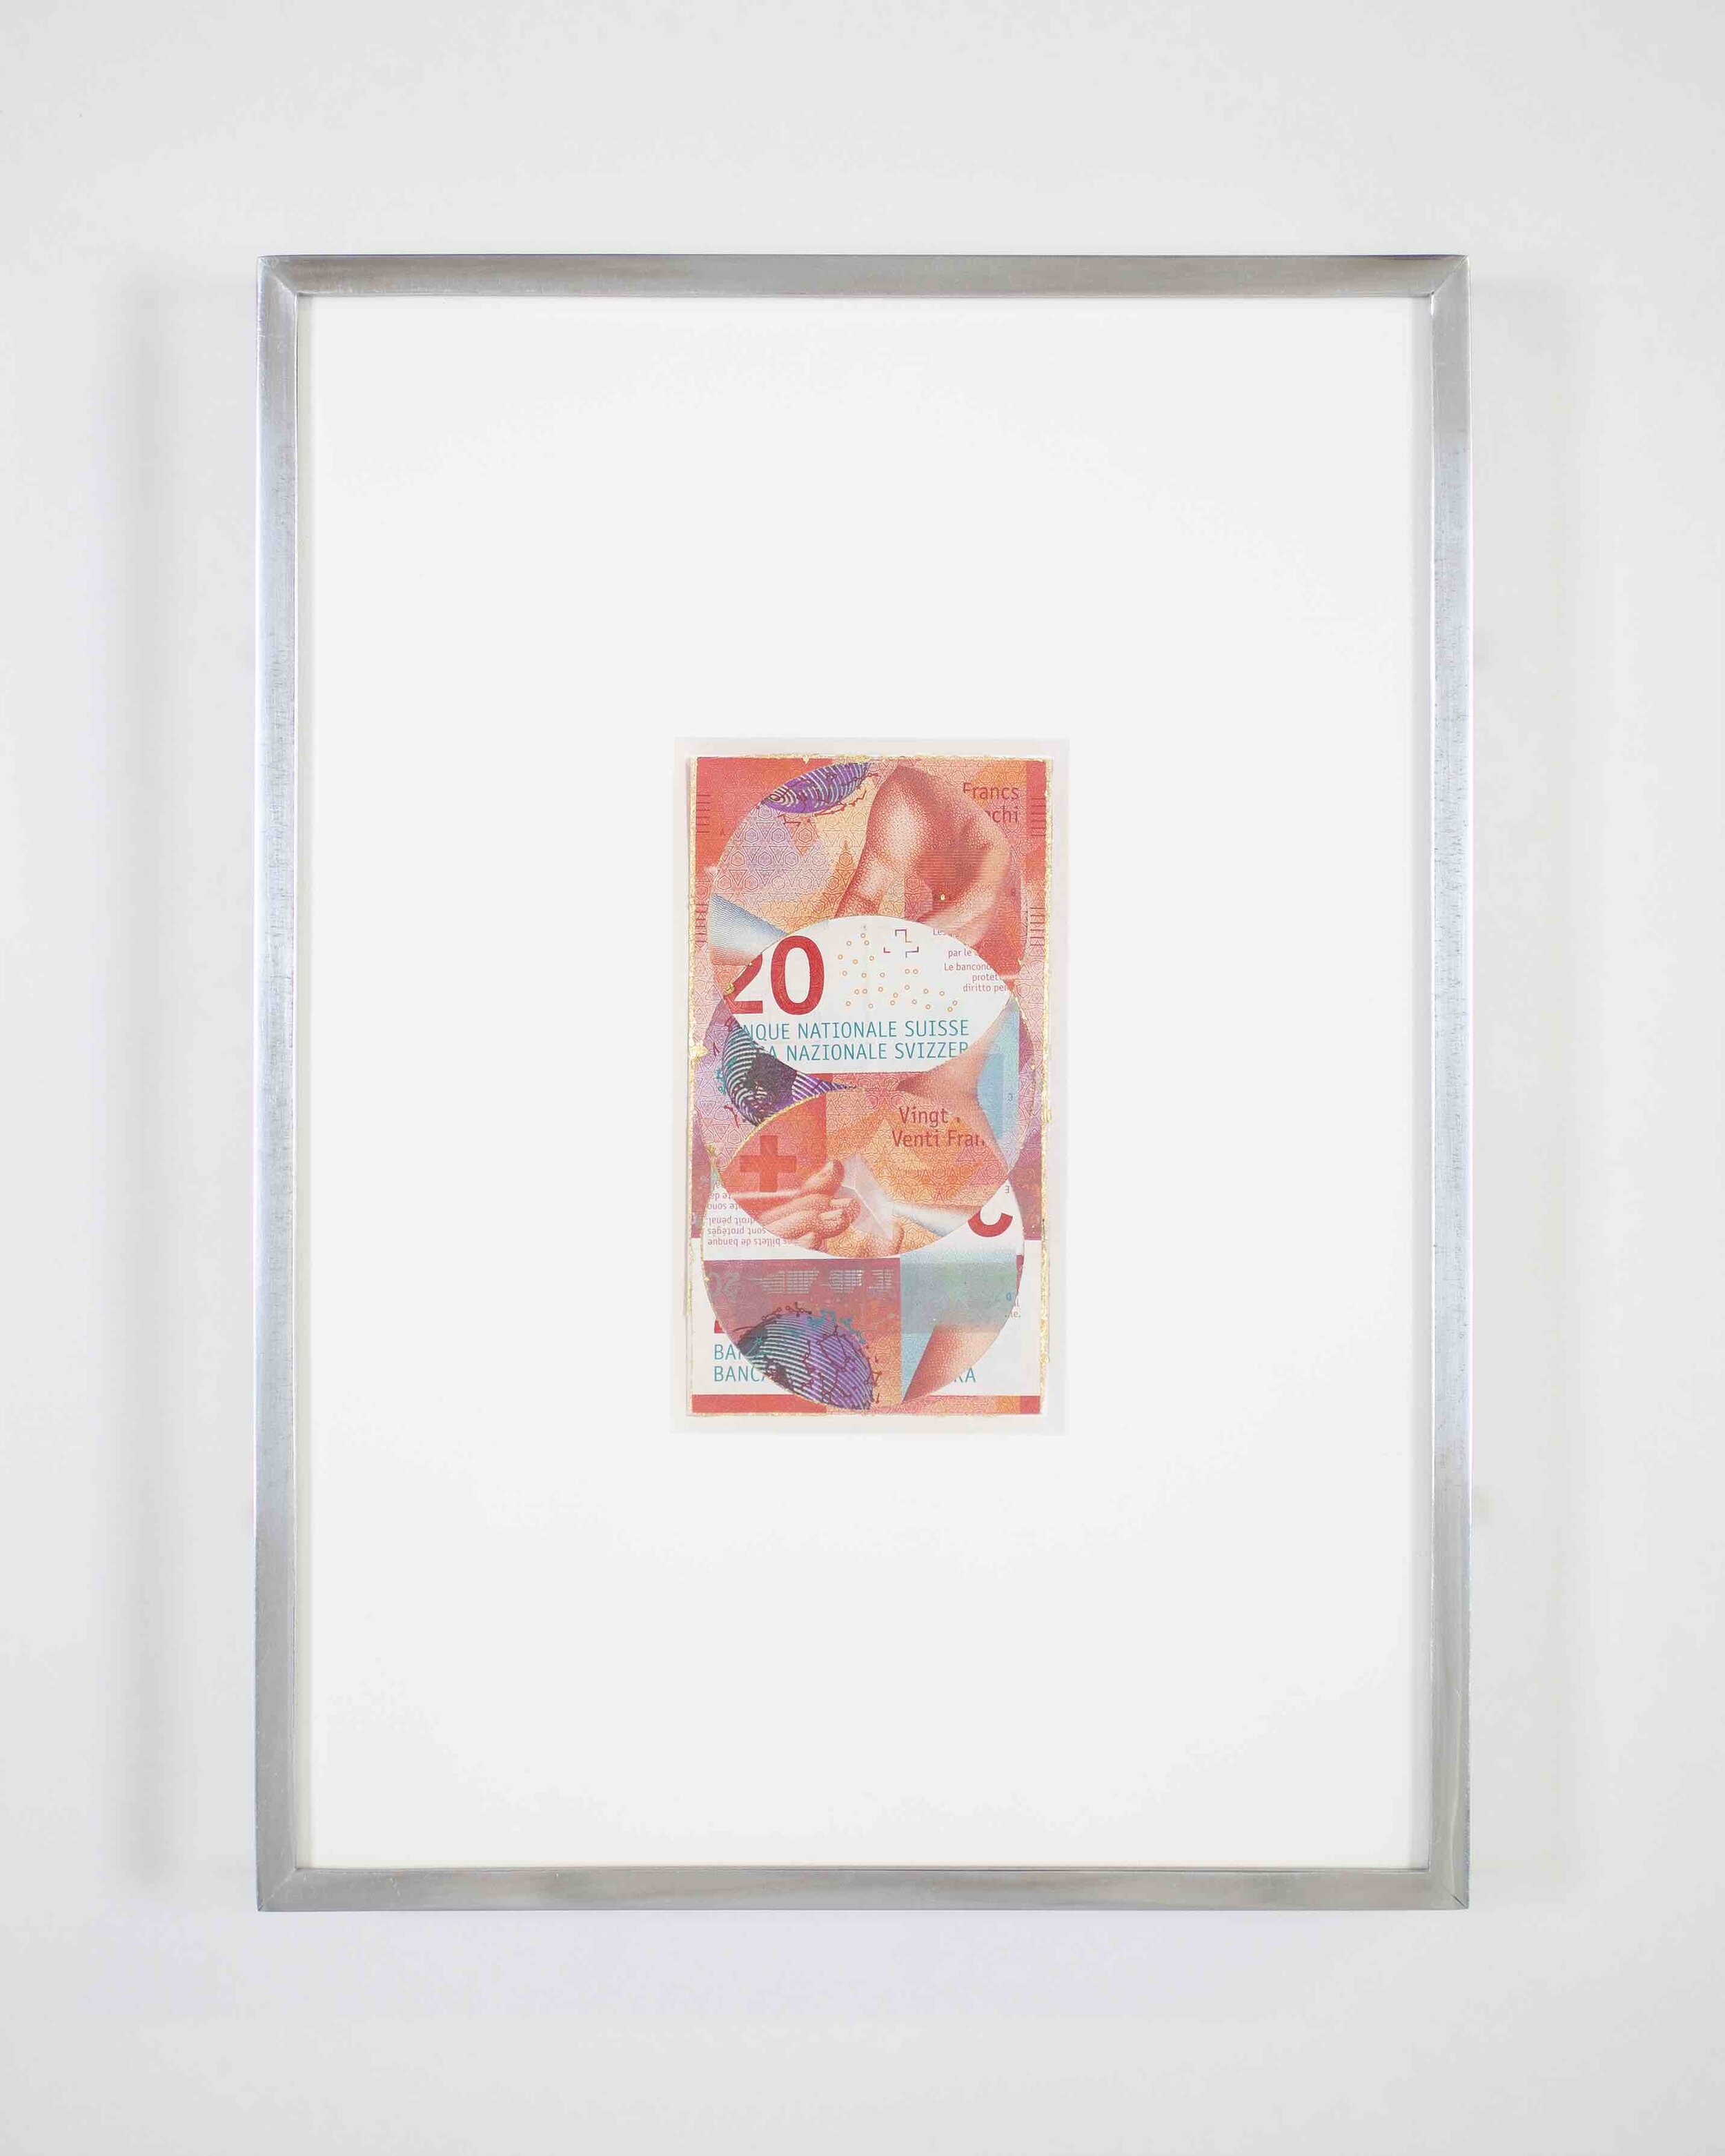   Blind Collage (Three 180º Rotations, Swiss National Bank Twenty-Franc Note: Series 2017, Issued by Banque Nationale Suisse, Printed in Zürich, Switzerland by Orell Füssli Security Printing Ltd., Designed by Manuela Pfrunder GMBH, Serial No. 15G6430